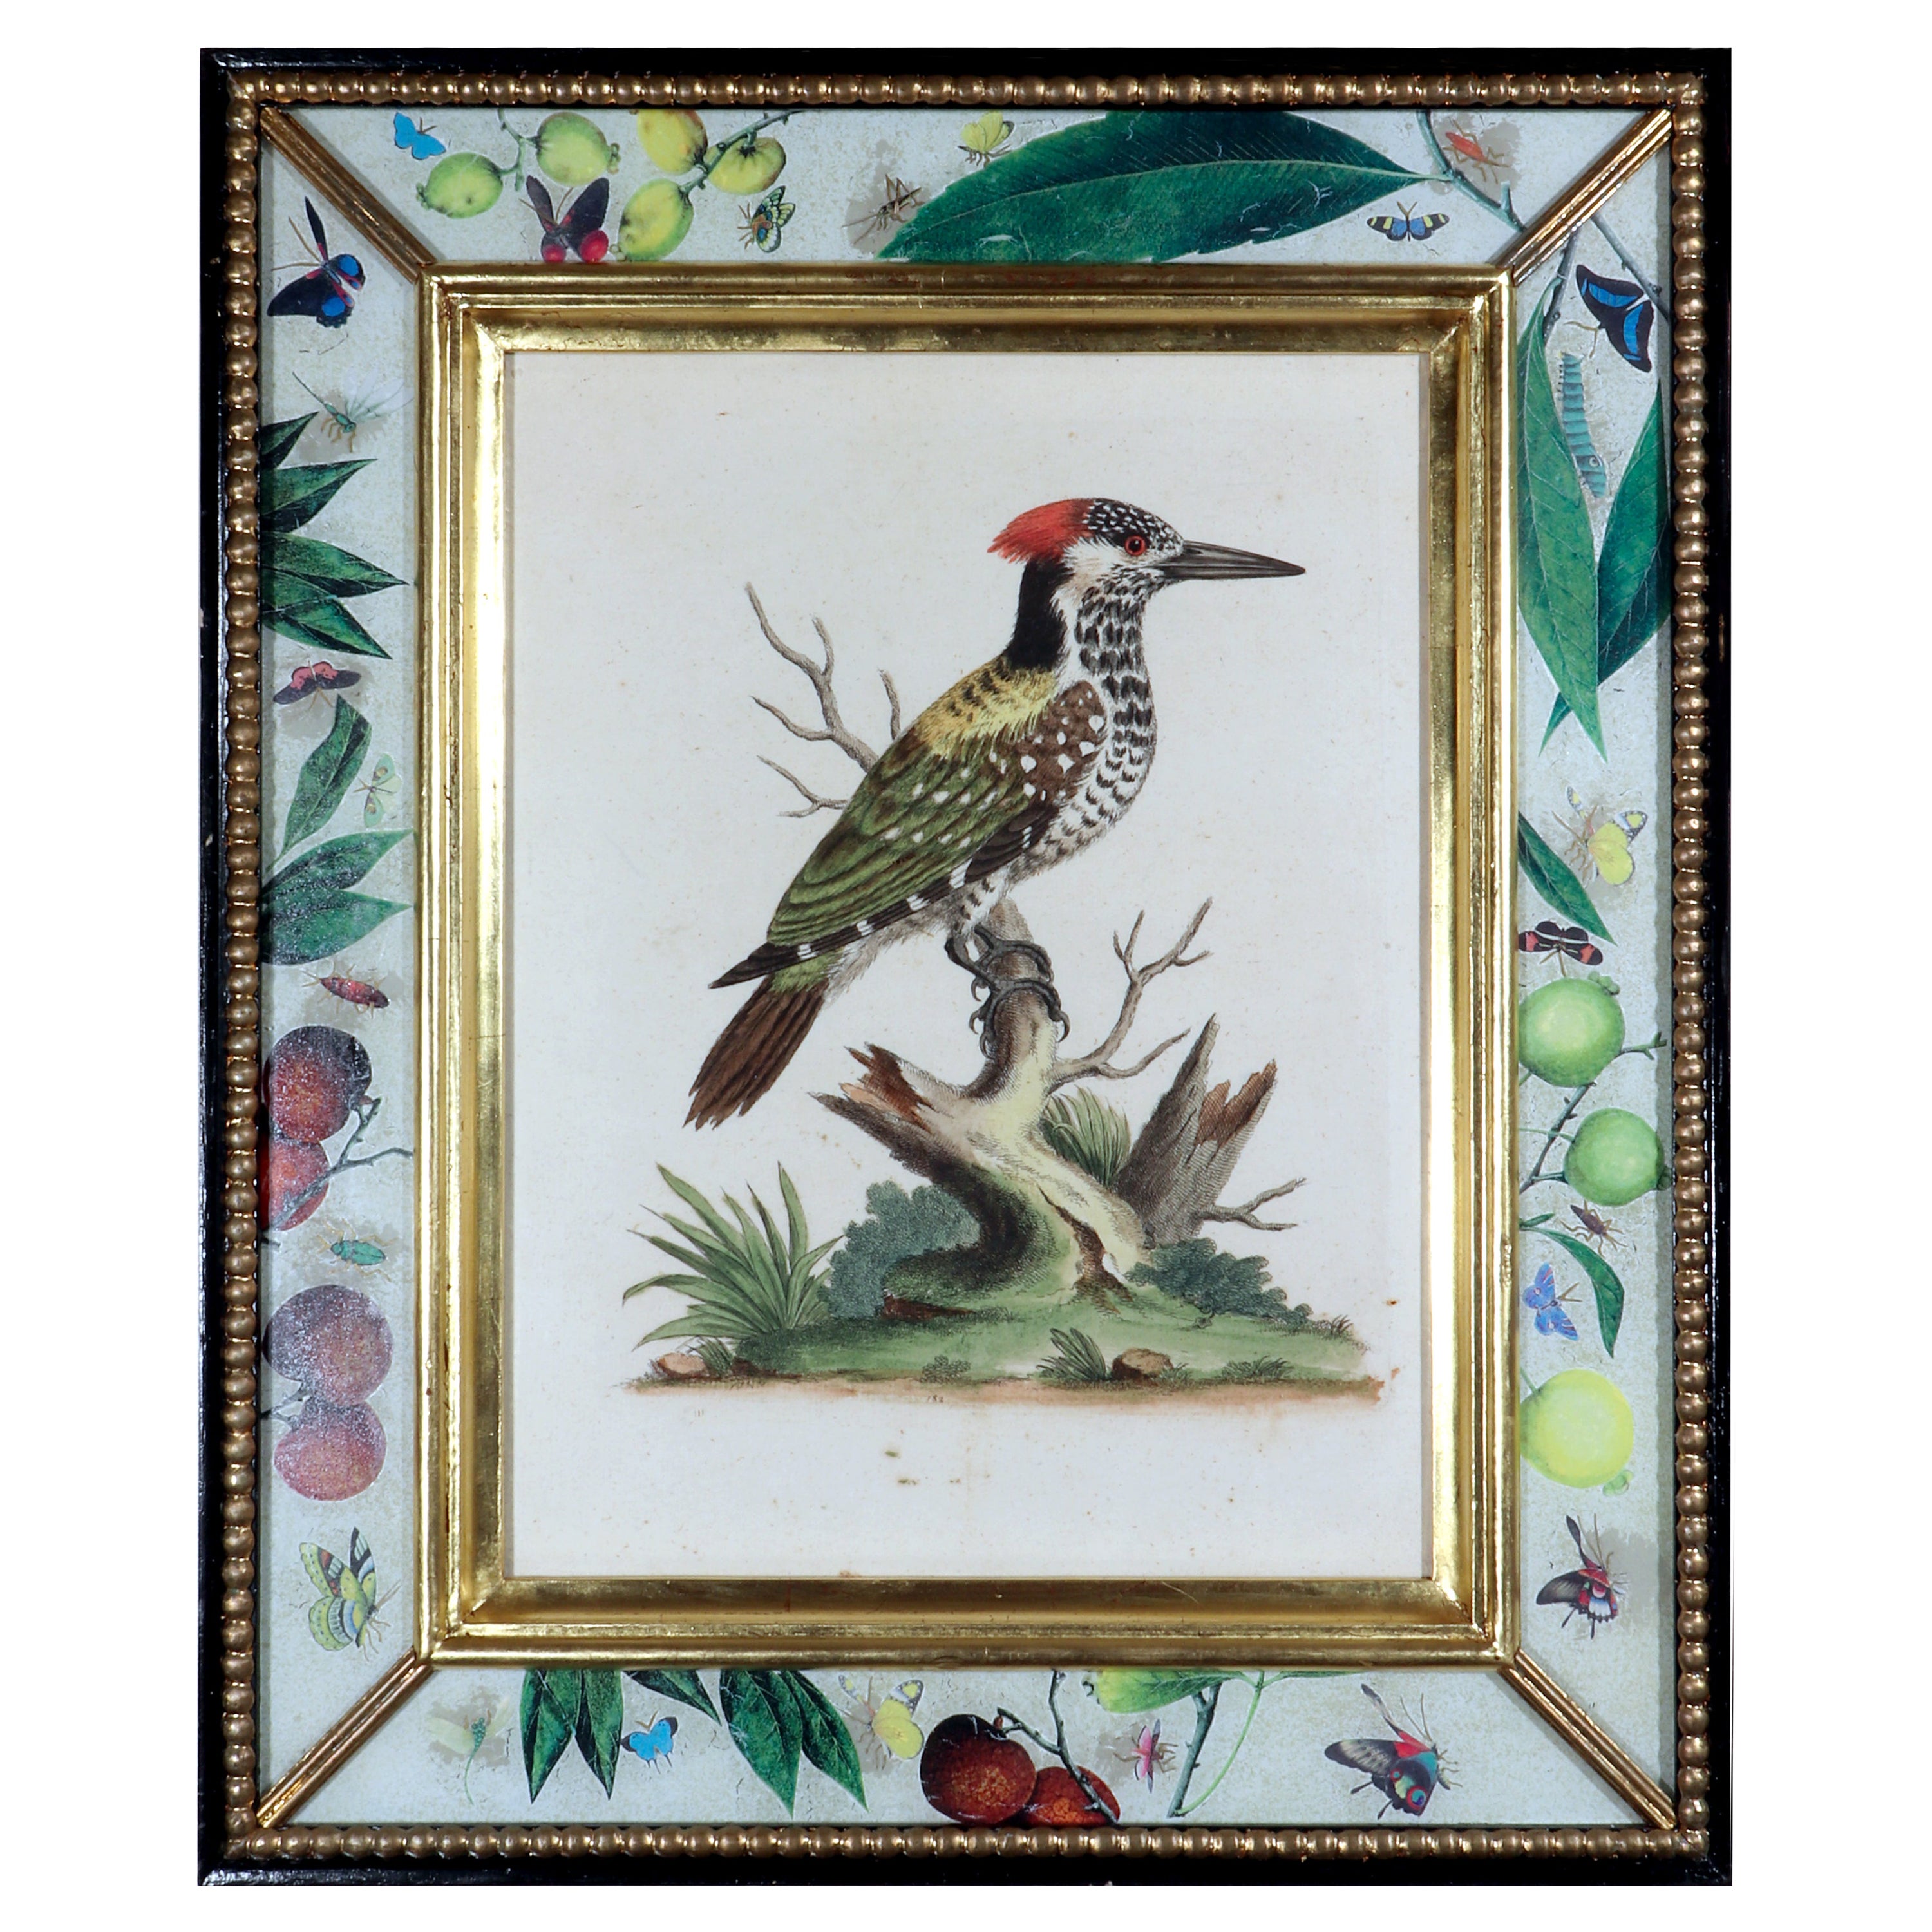 George Edwards Engravings of a Woodpecker